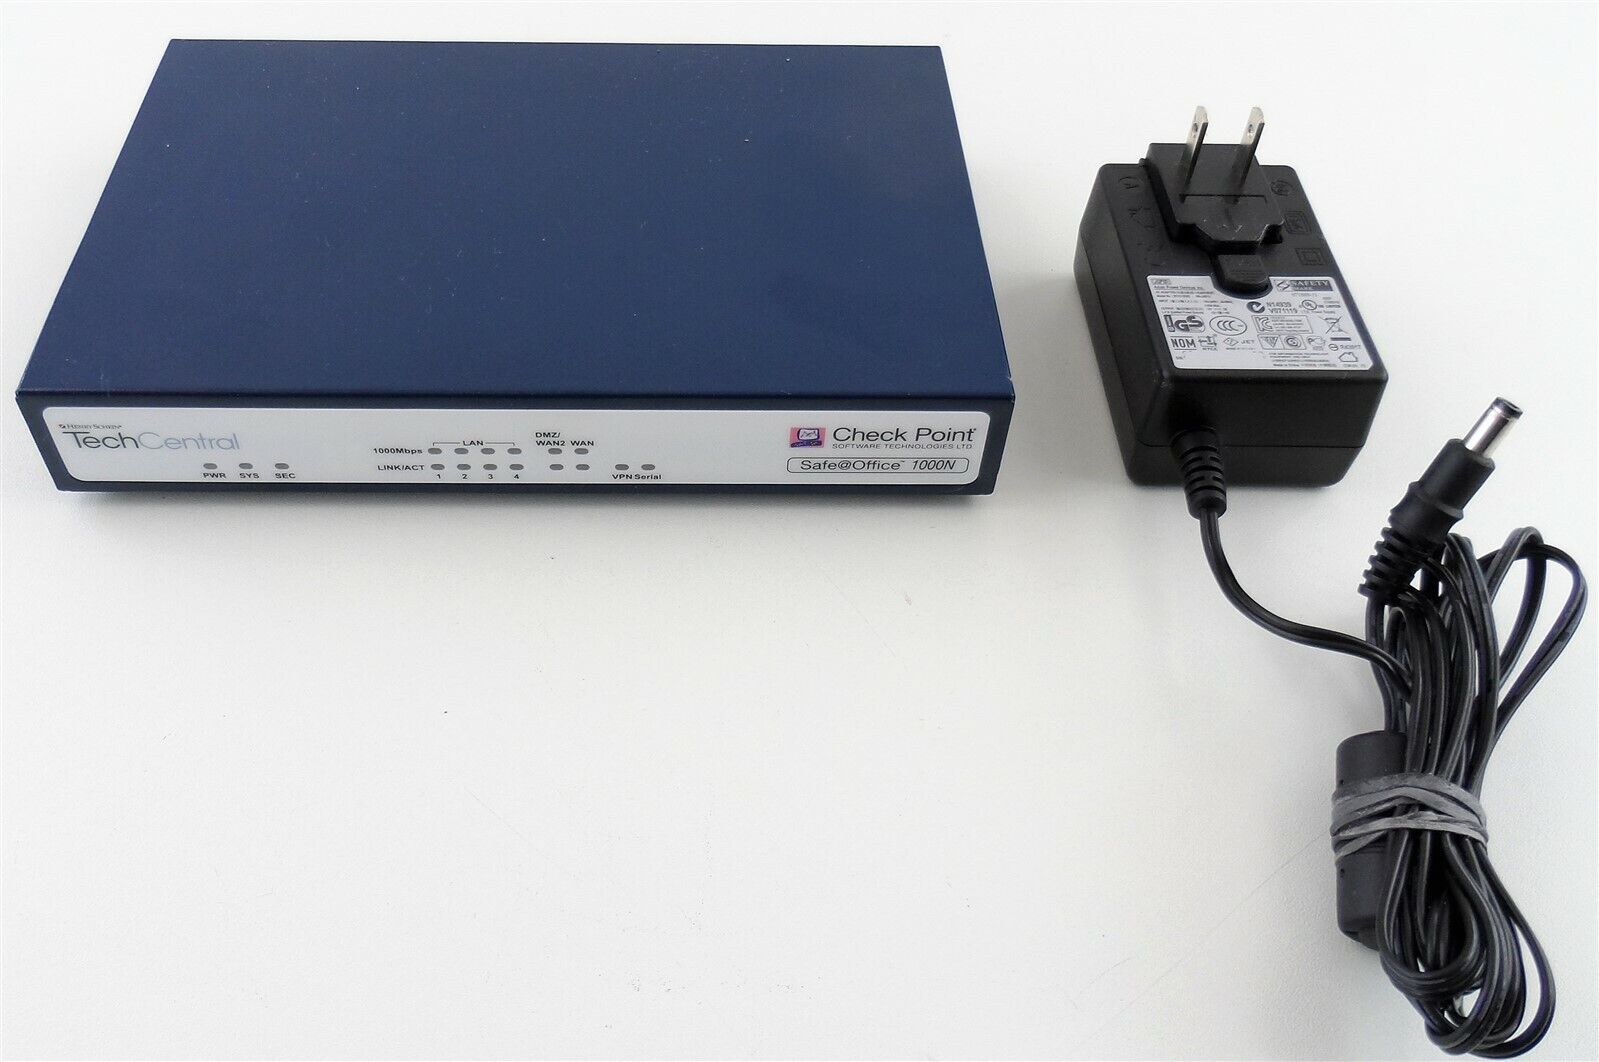 Check Point SBXN-100-1 Safe@Office 1000N with Power Supply Used